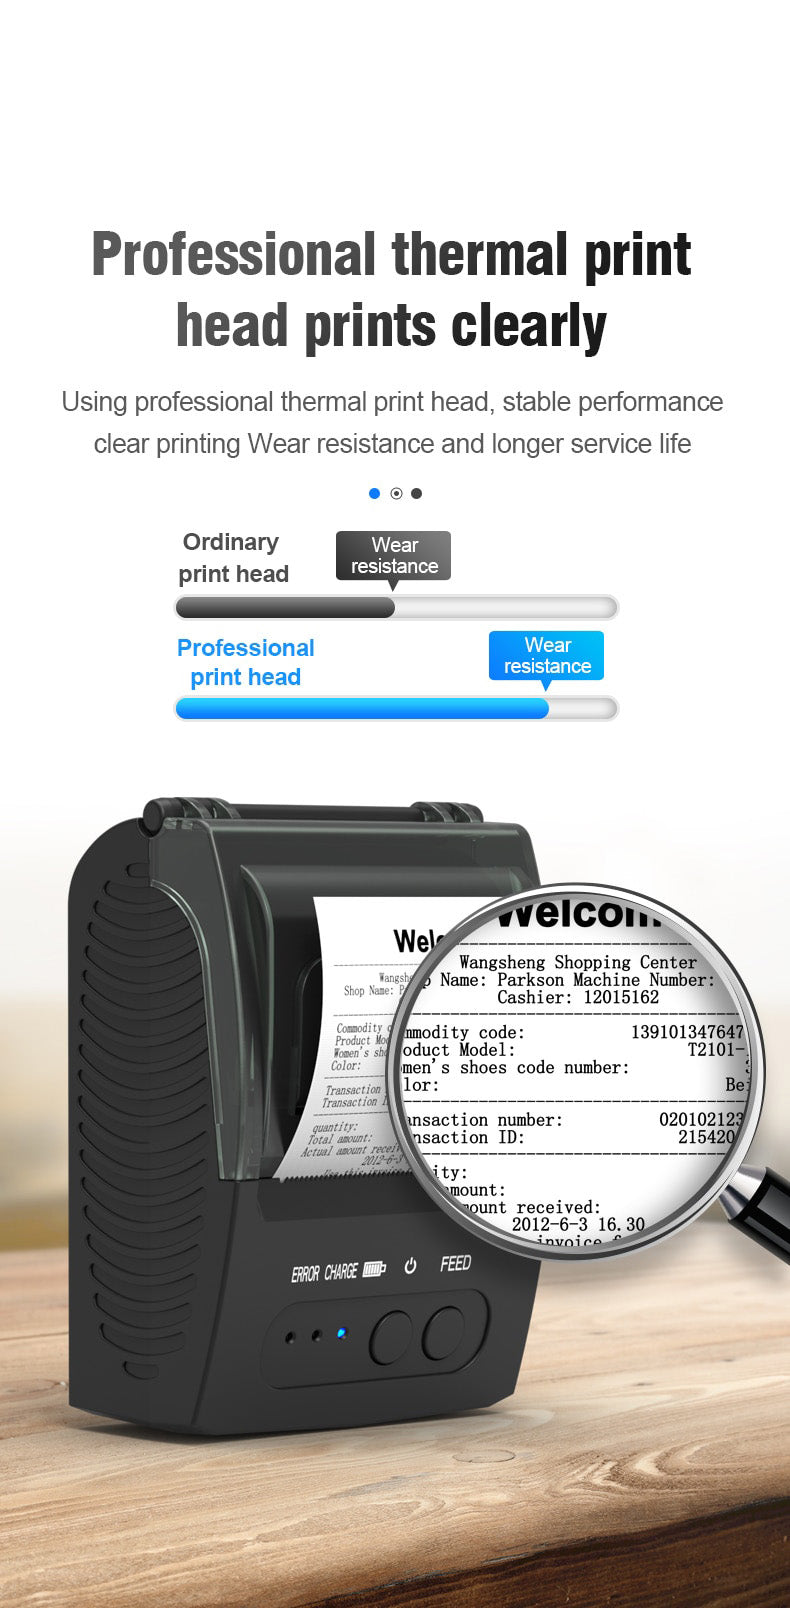 Mini  Portable Thermal Receipt Printer  BT 58mm Mobile Phone Android IOS PC